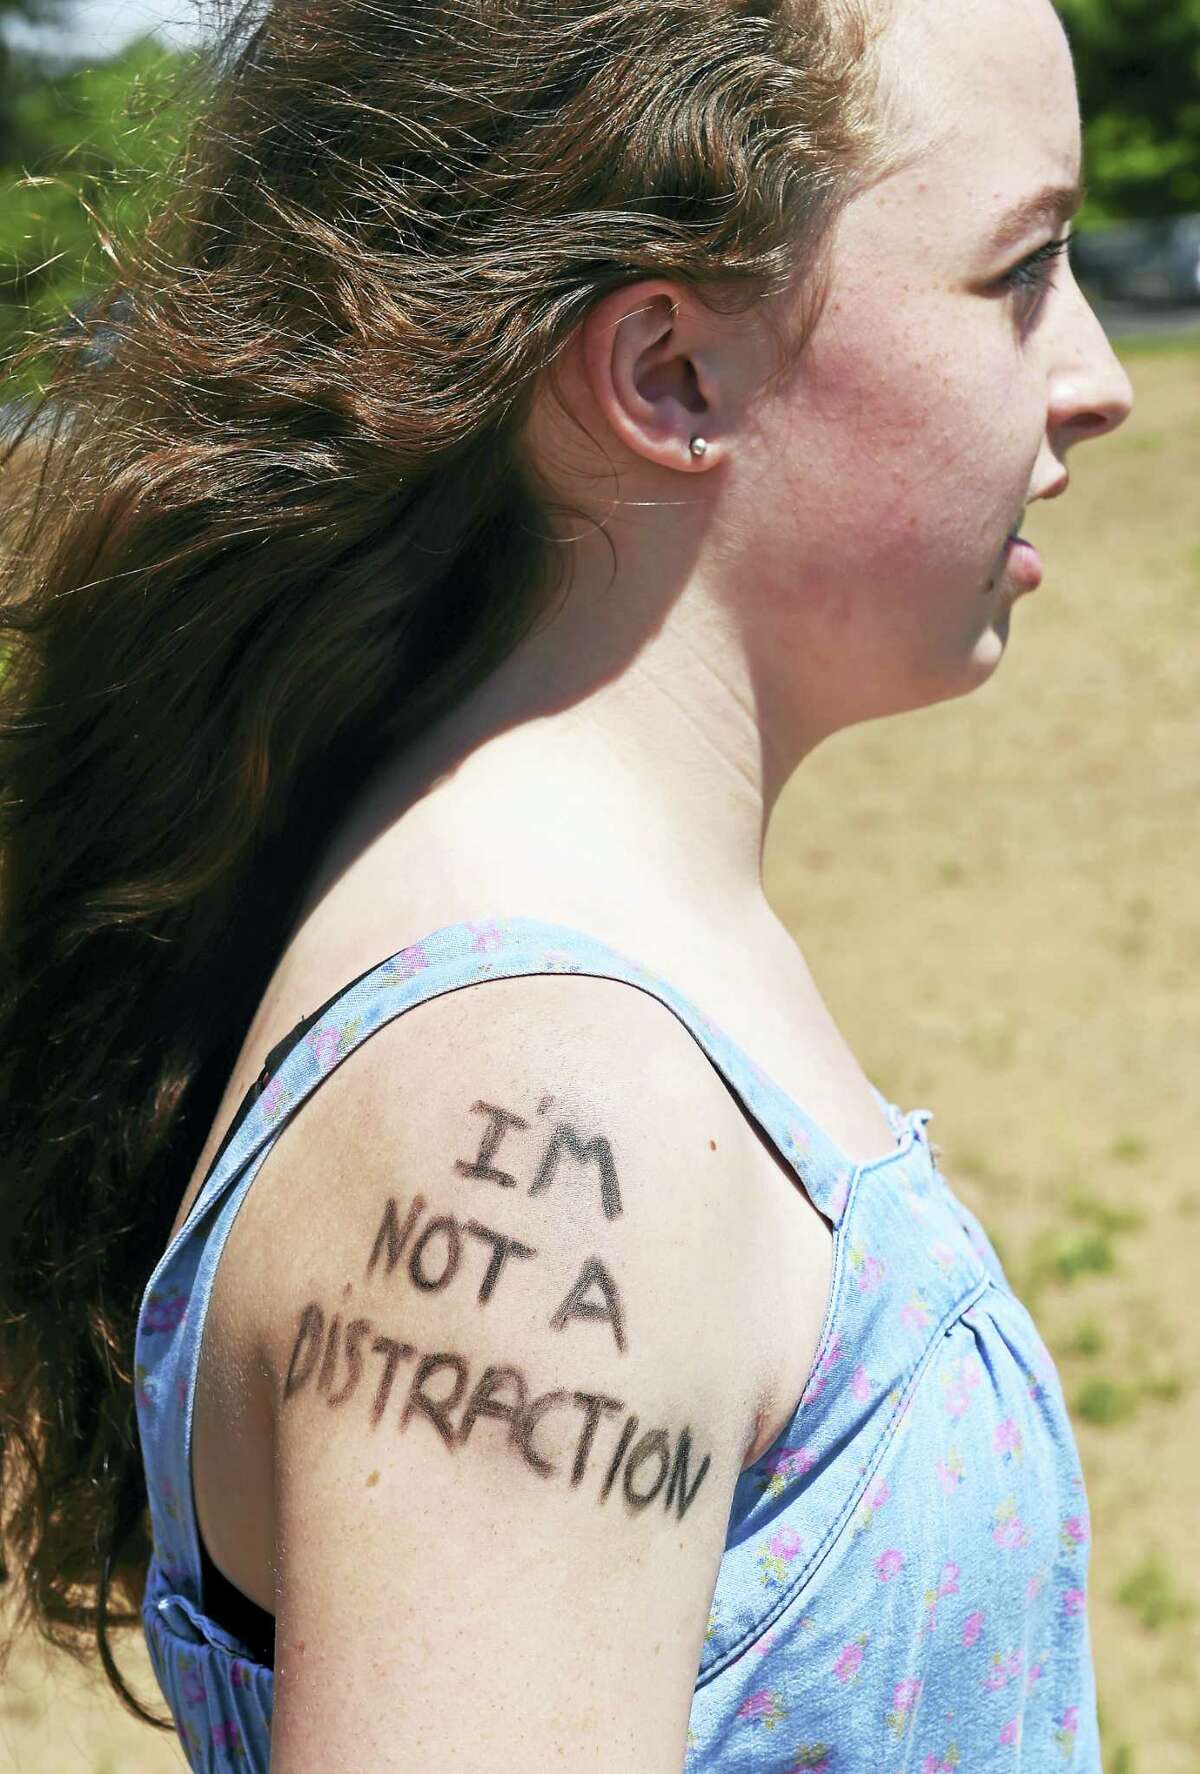 Riley Hawkes was one of a group of students with a message written on her arm Tuesday to protest the dress code and what they said is unfair enforcement at Guilford High School.